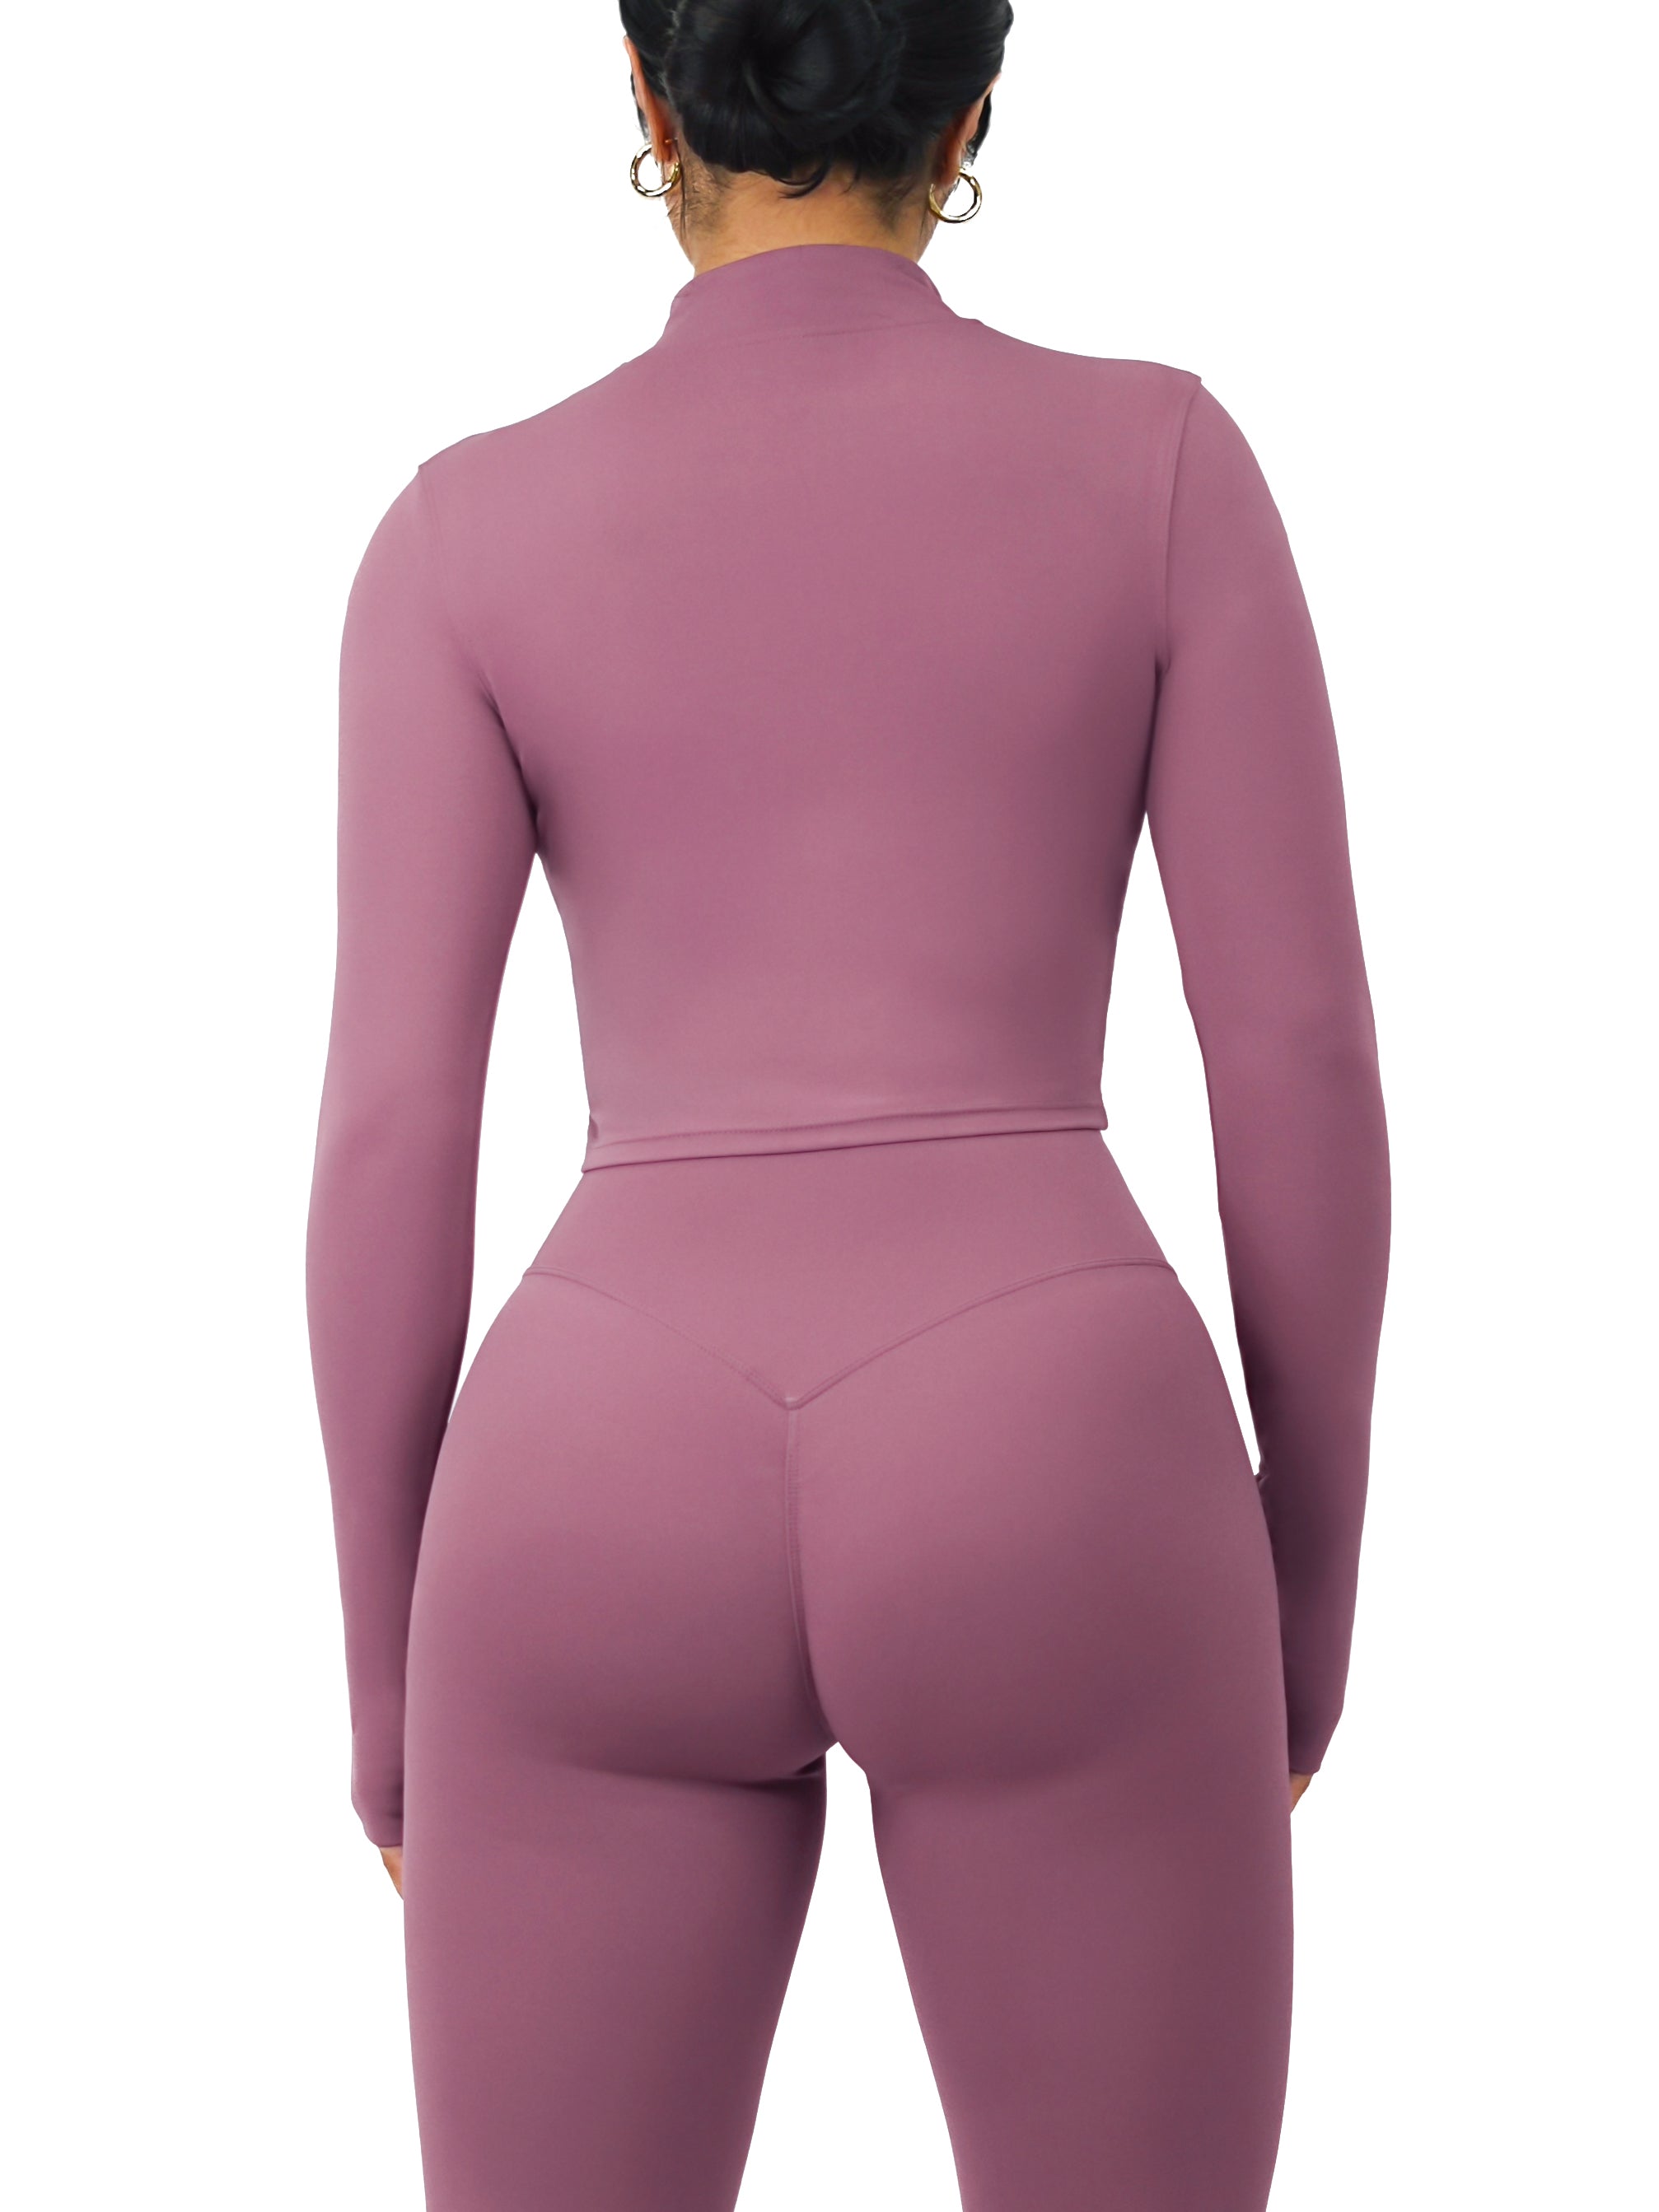 Viral Compression Jacket (Mulberry Purple)